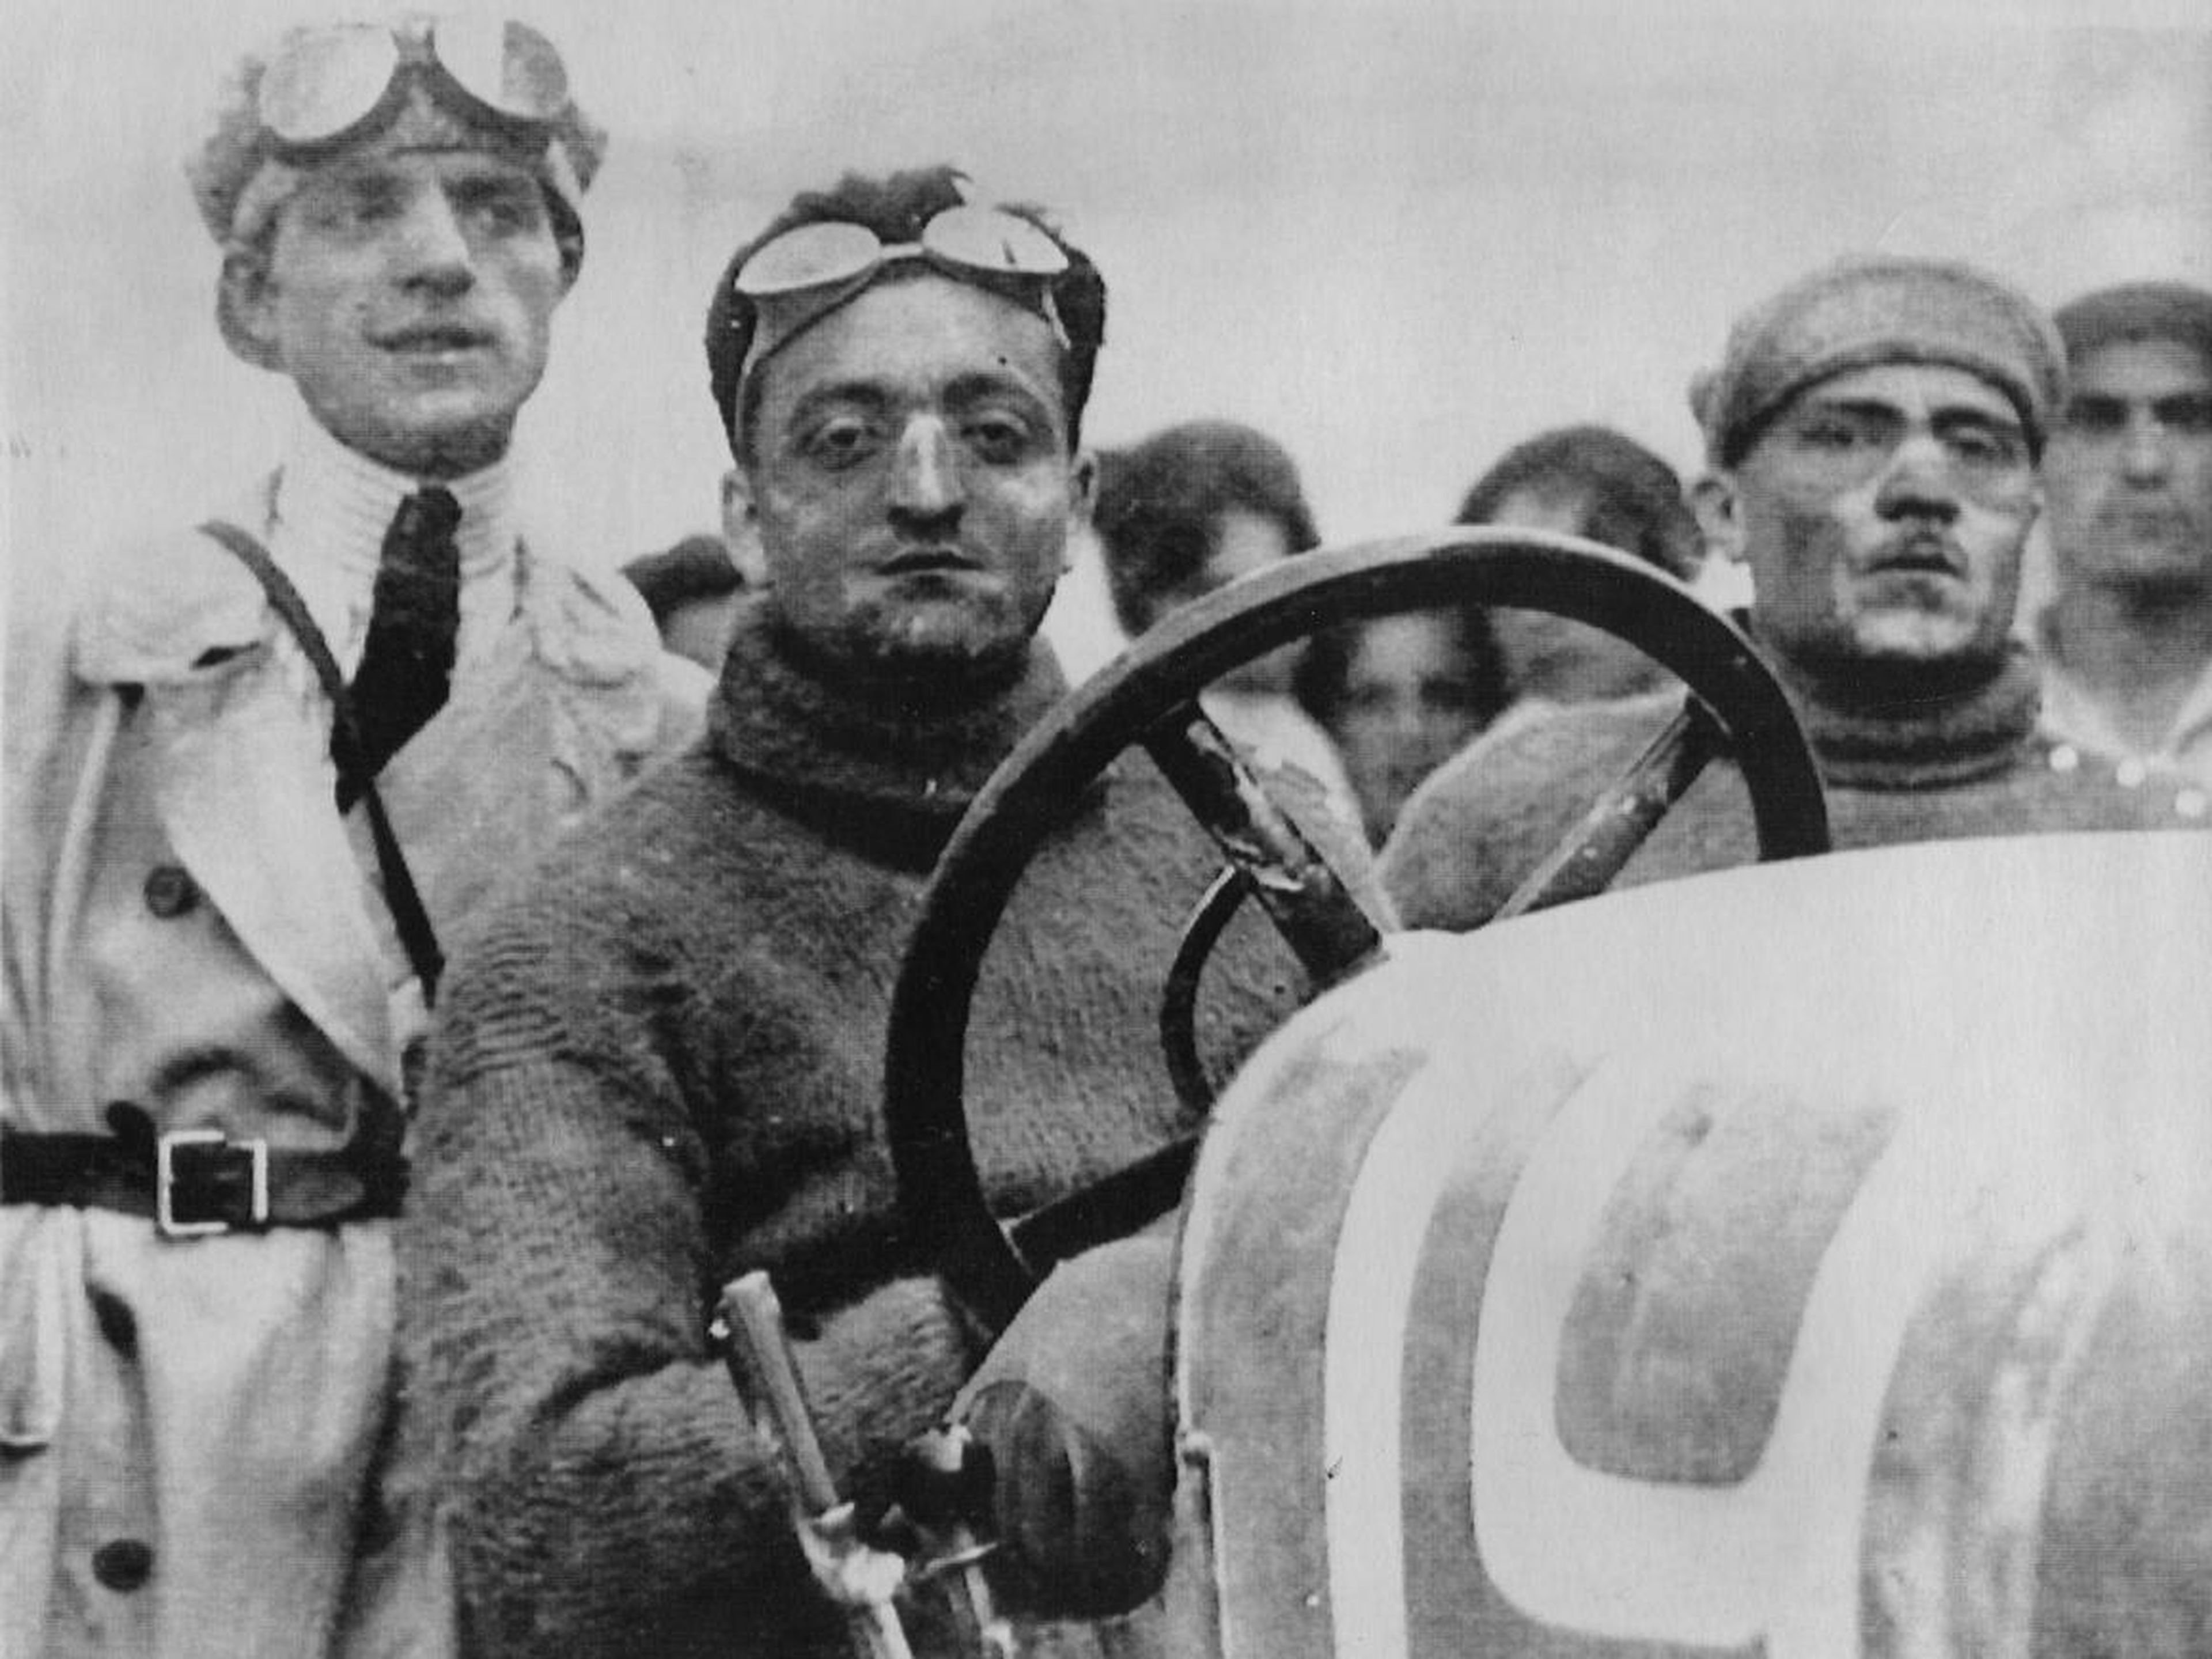 In 1908, A 10-year-old Enzo Ferrari saw his first car race and immediately became hooked. As a young adult, Enzo was drafted by the Italian army to fight in World War I.